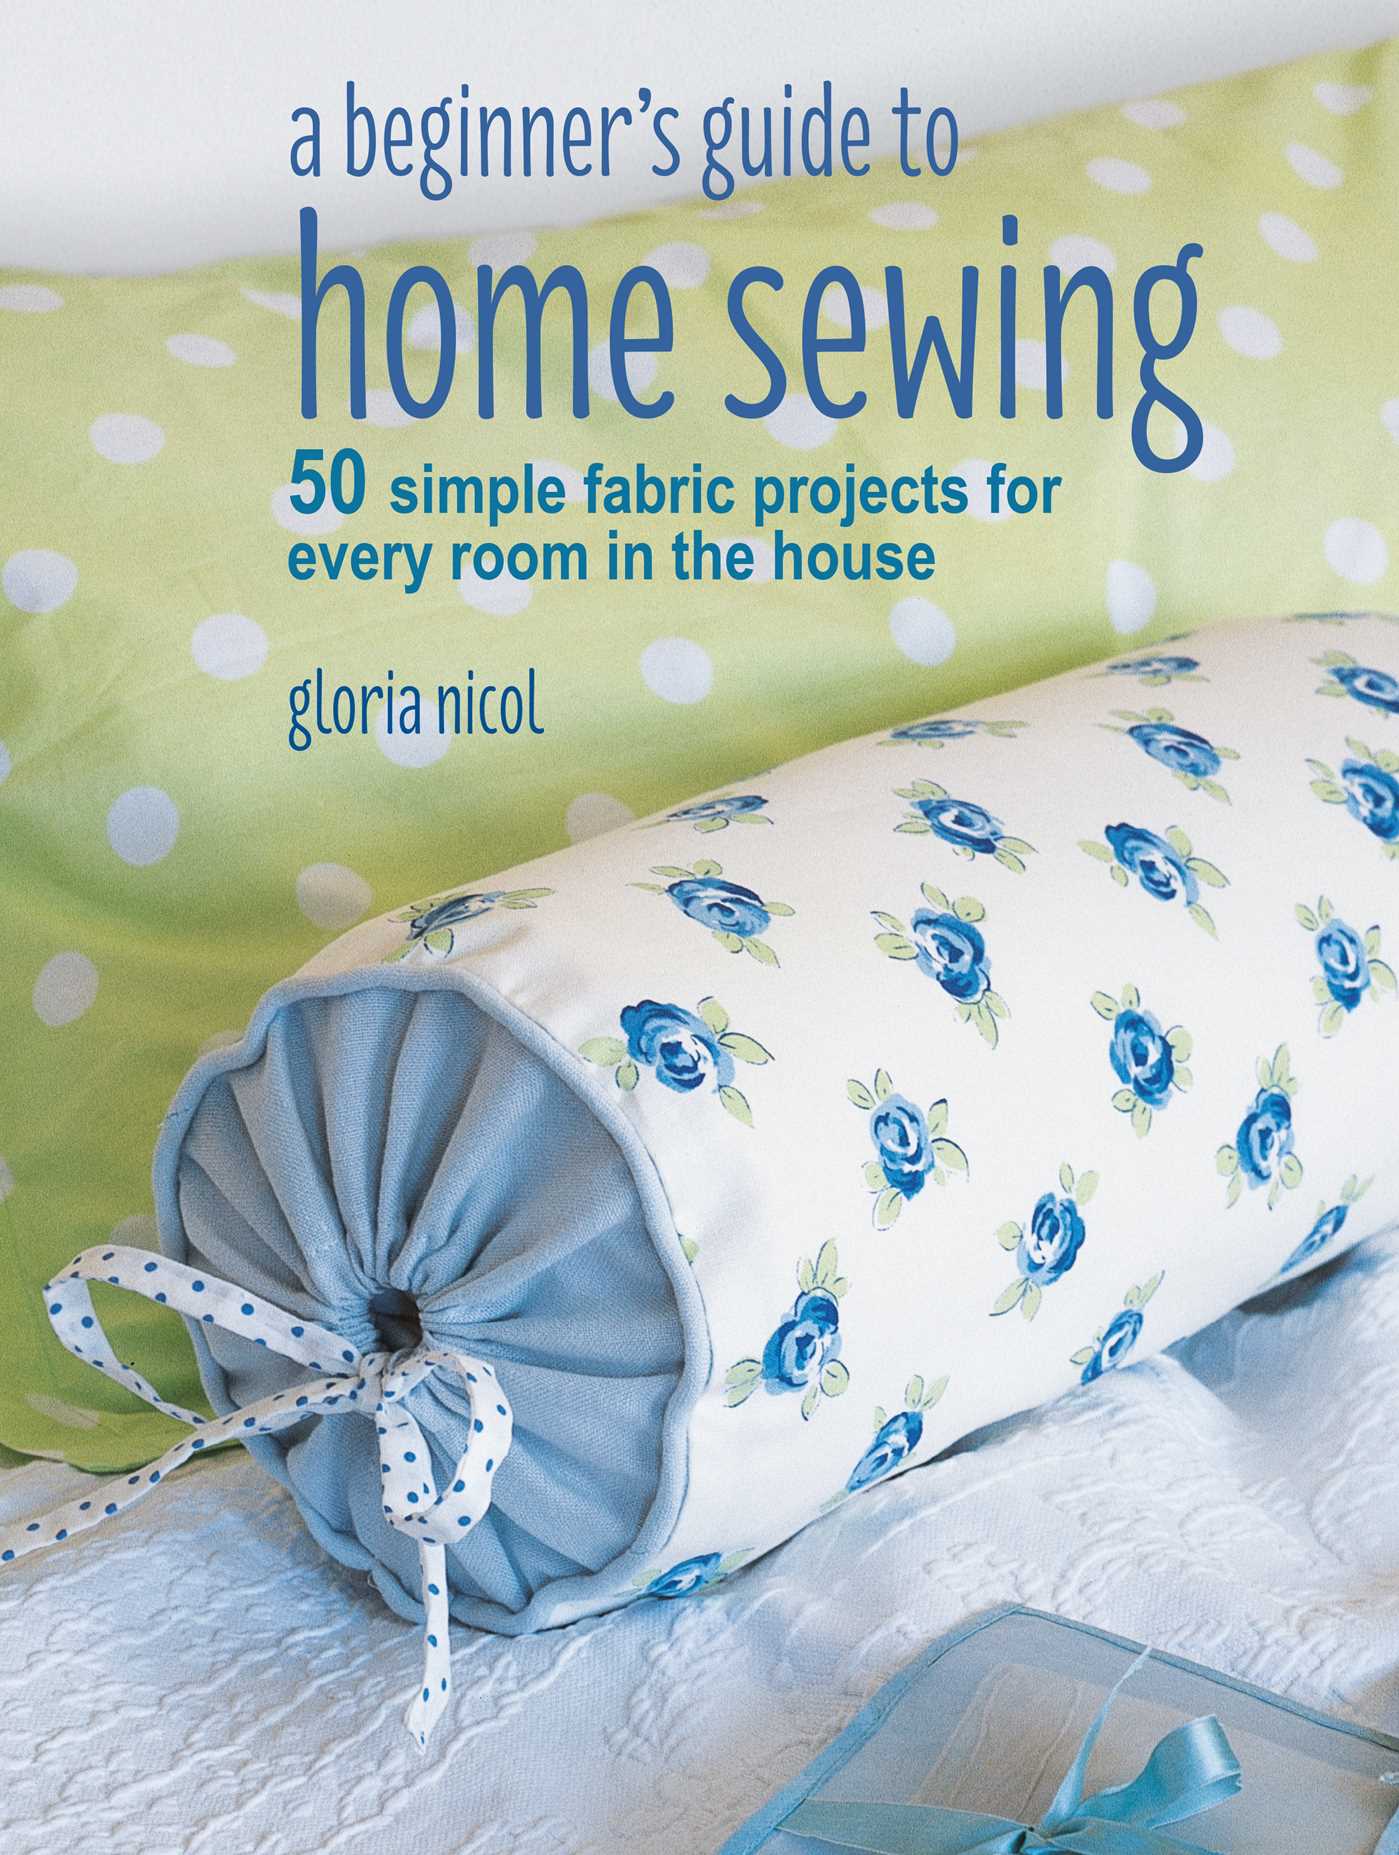 A Beginner's Guide to Home Sewing : 50 simple fabric projects for every room in the house